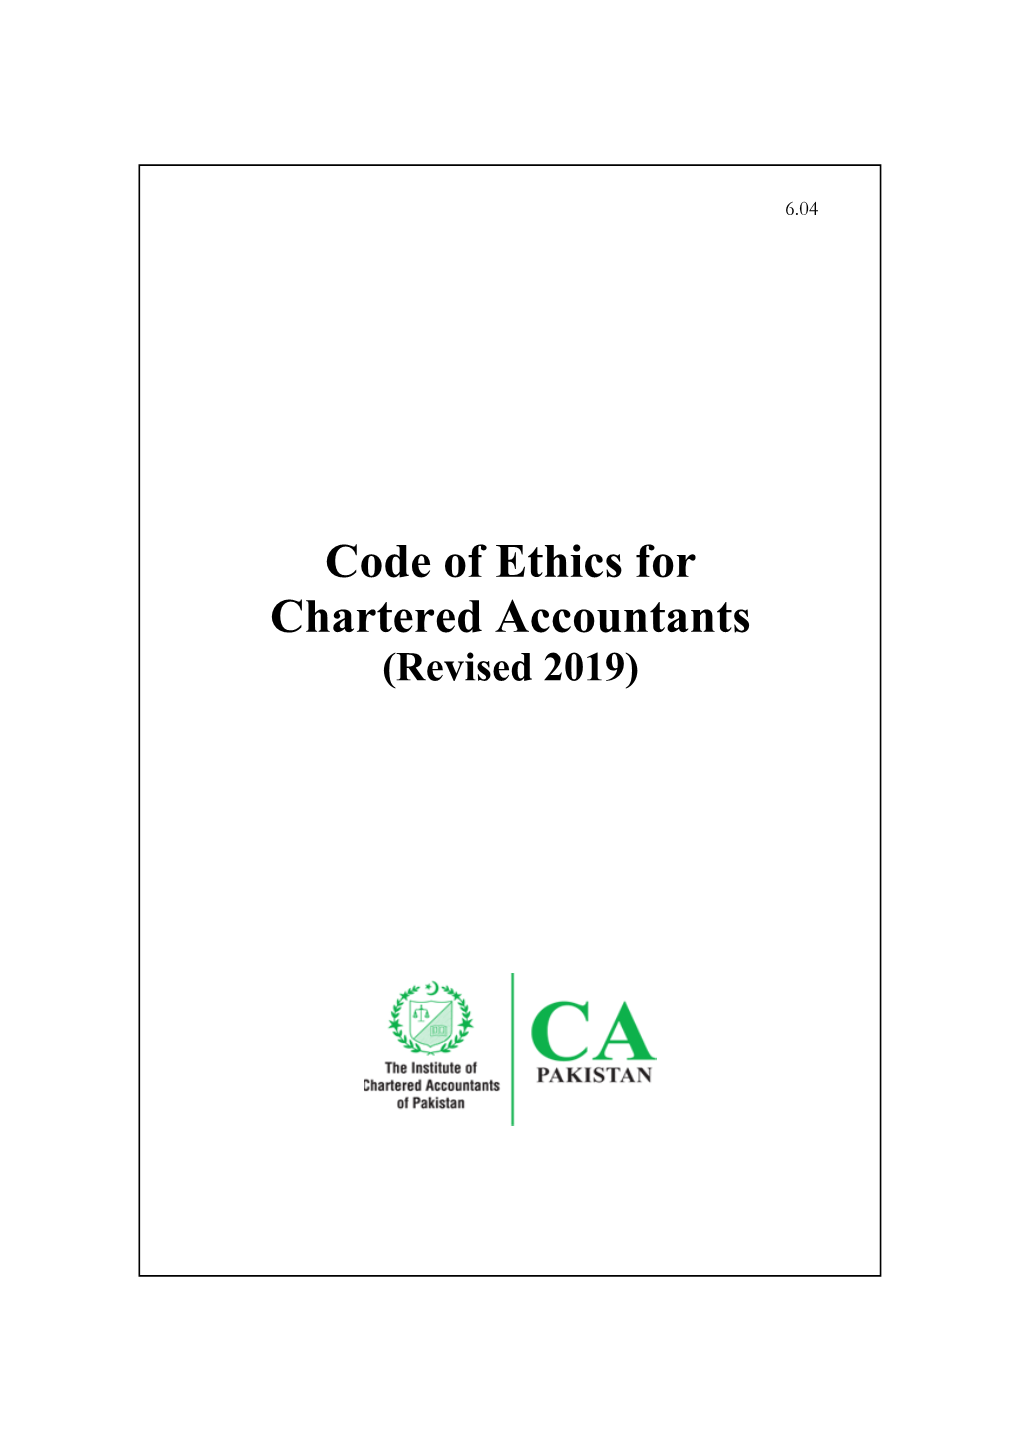 Code of Ethics for Chartered Accountants (Revised 2019)